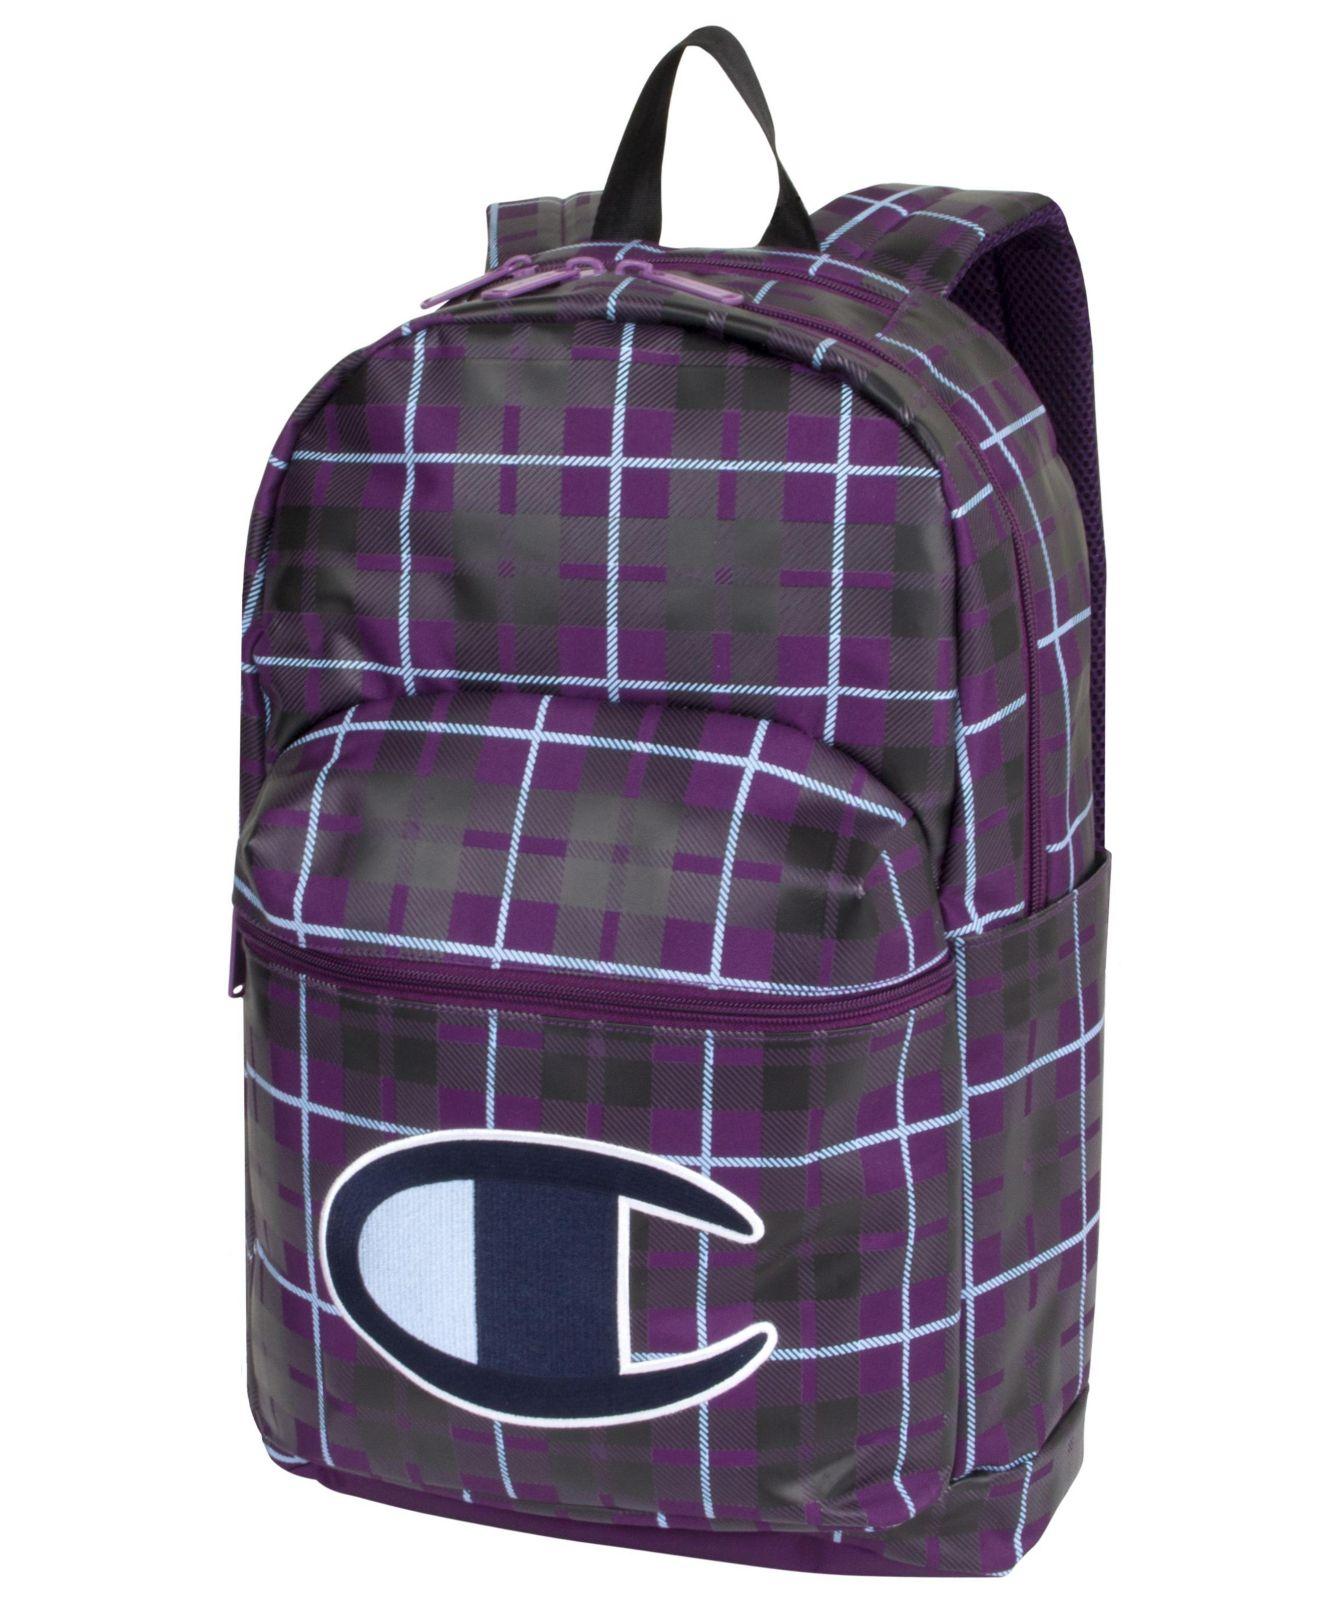 Champion Supercize Plaid Backpack in 